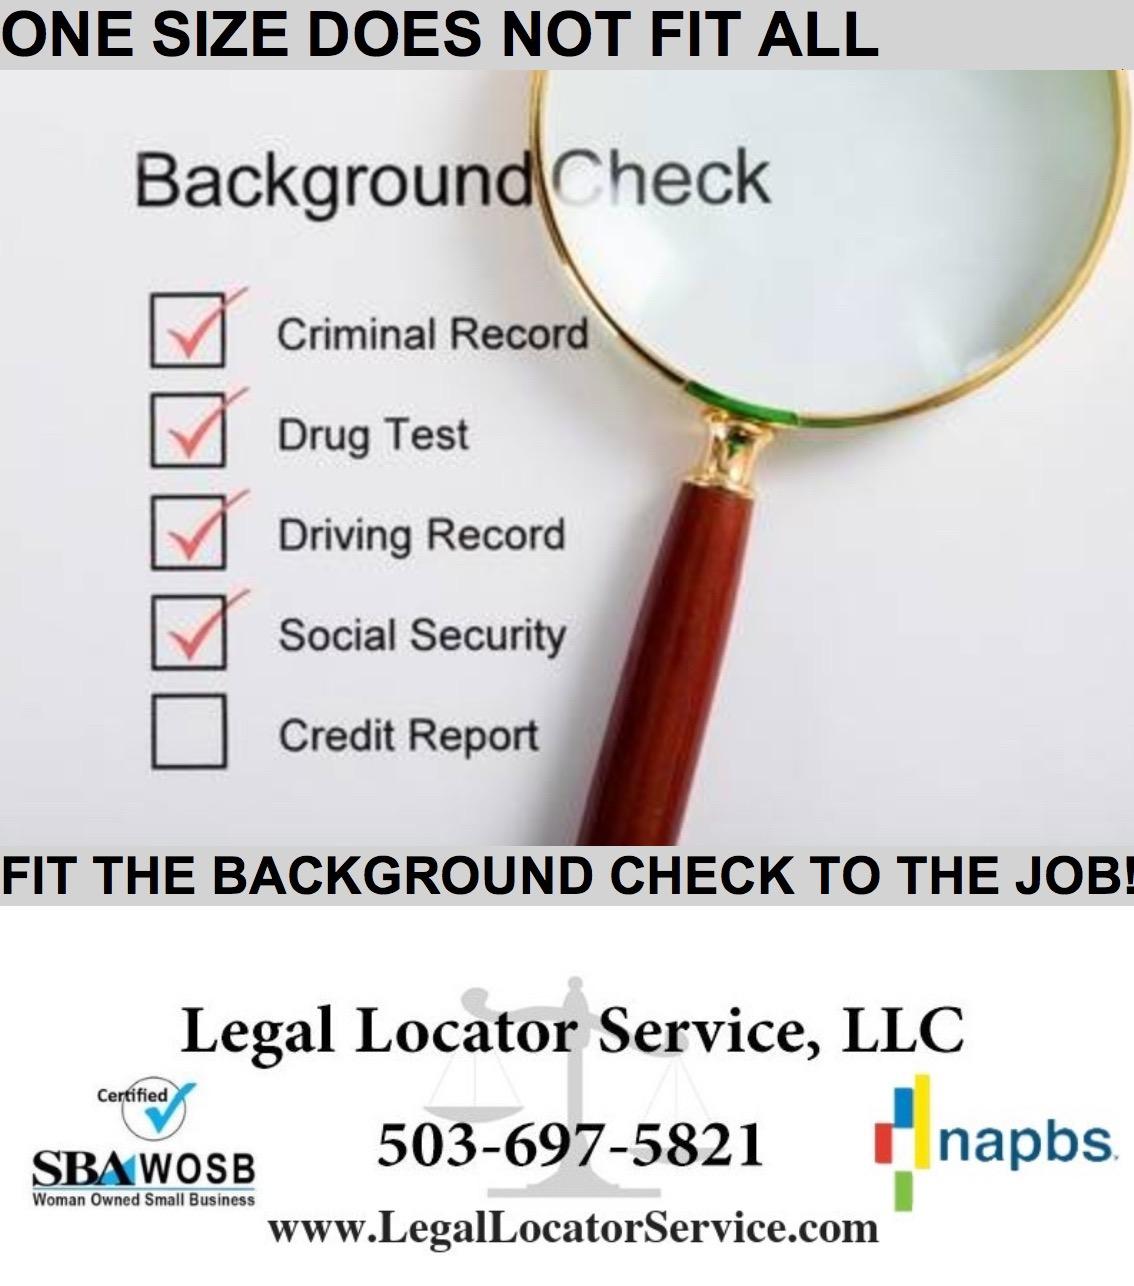 Fit the Background Check to the Job.
Legal Locator Service Background Checks since 1996
Based in Oregon and provide services Worldwide.
Women Centric Business